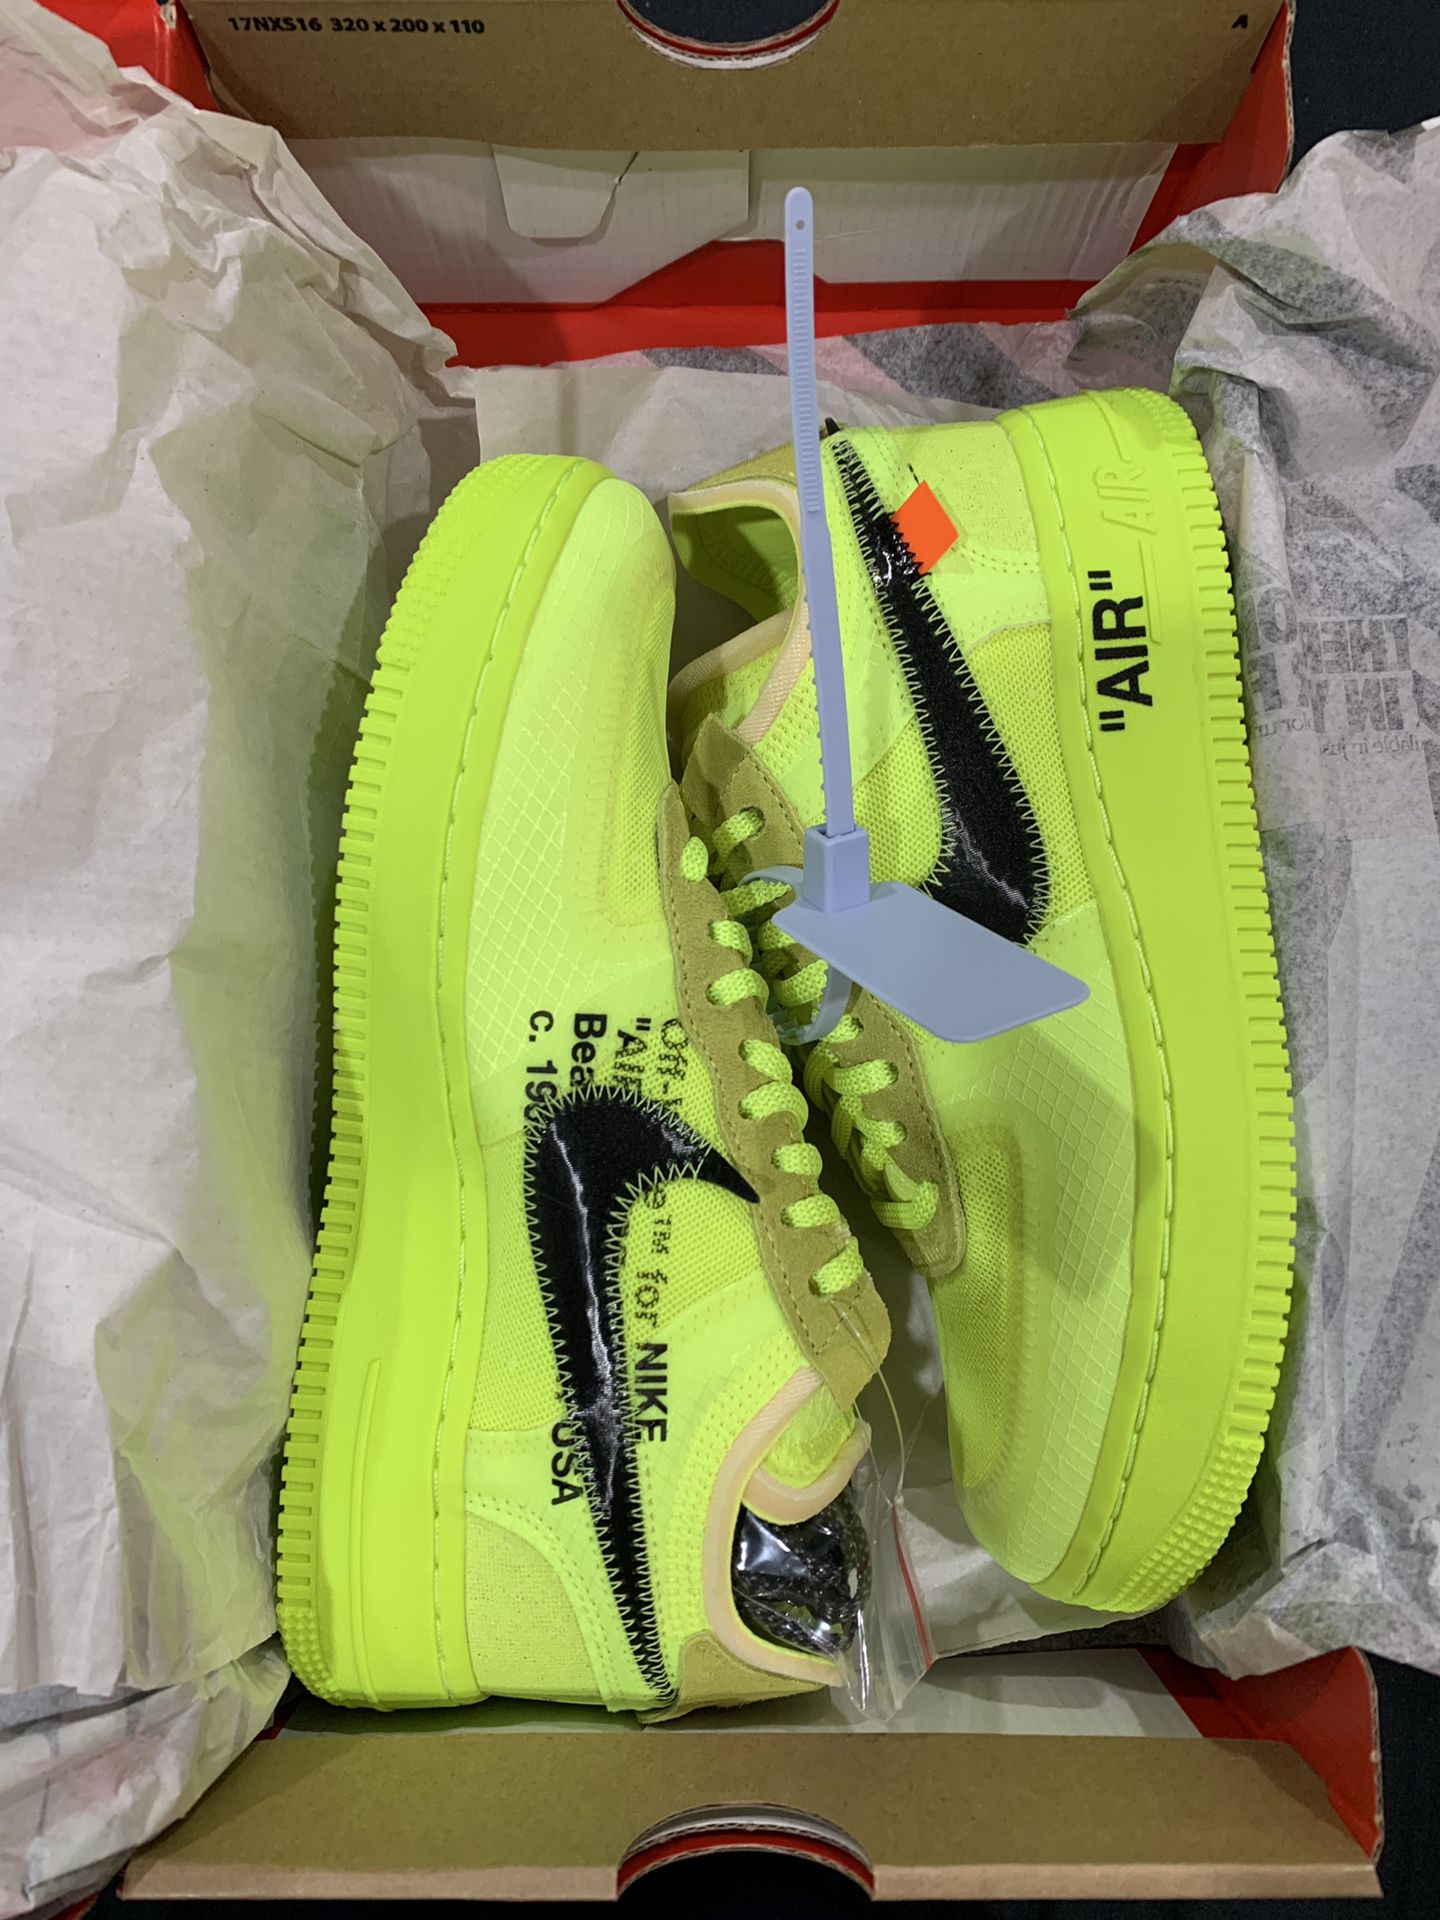 Nike Air Force 1 x Off-White “Brooklyn” Size 9 for Sale in Miami, FL -  OfferUp